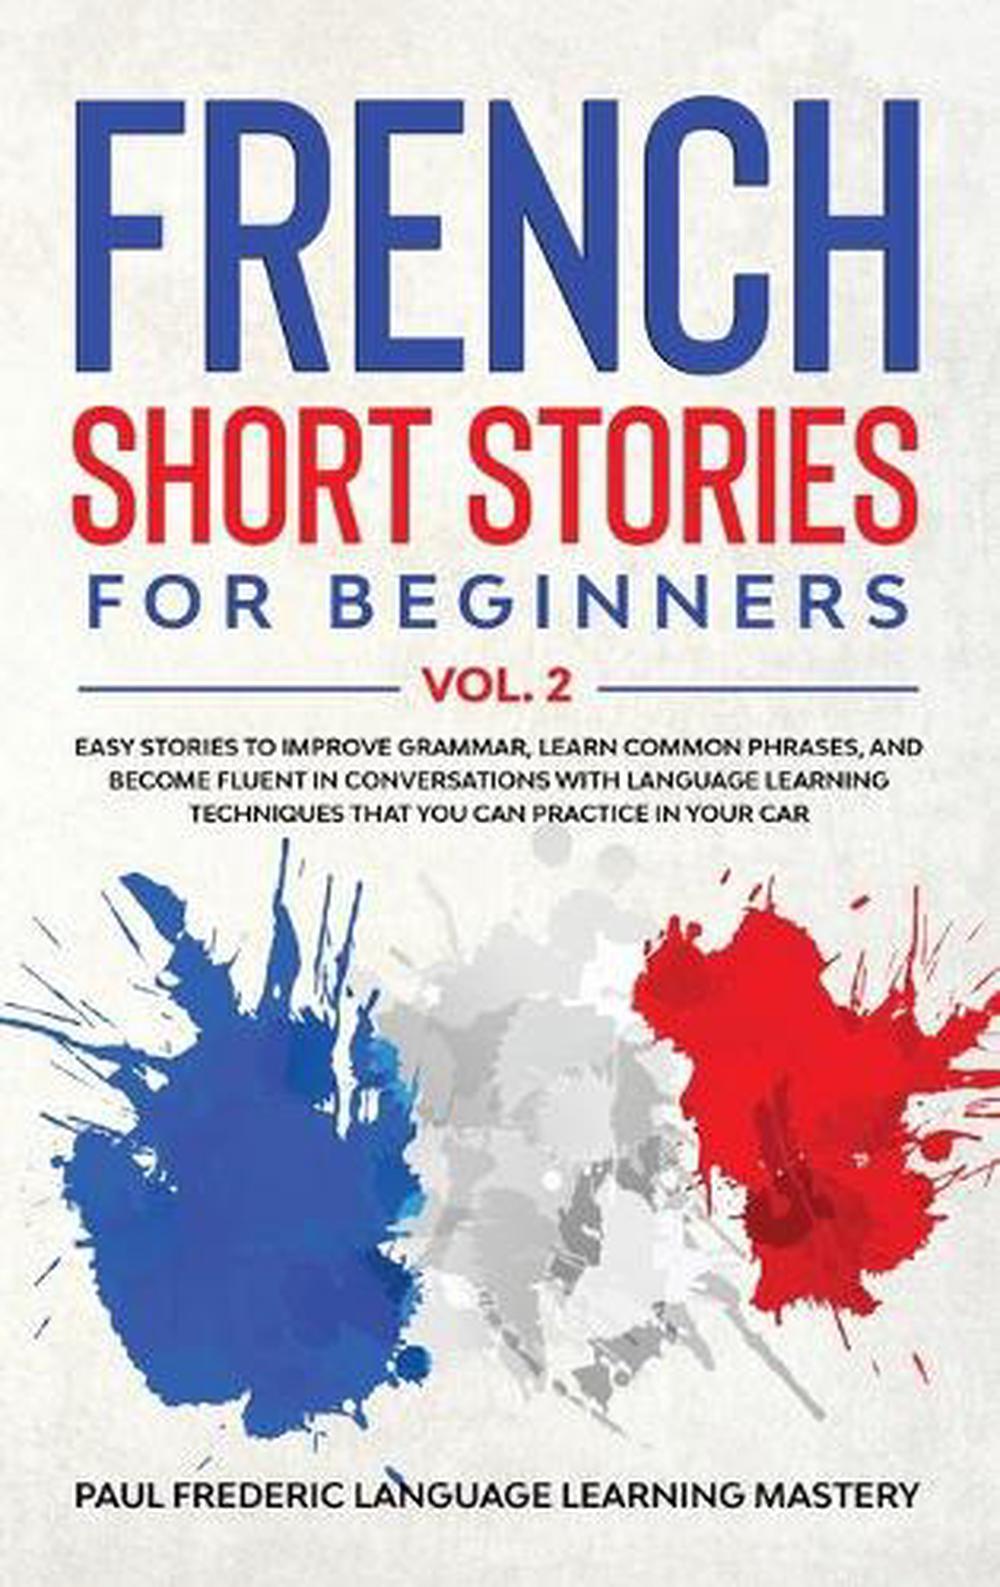 short stories in french olly richards